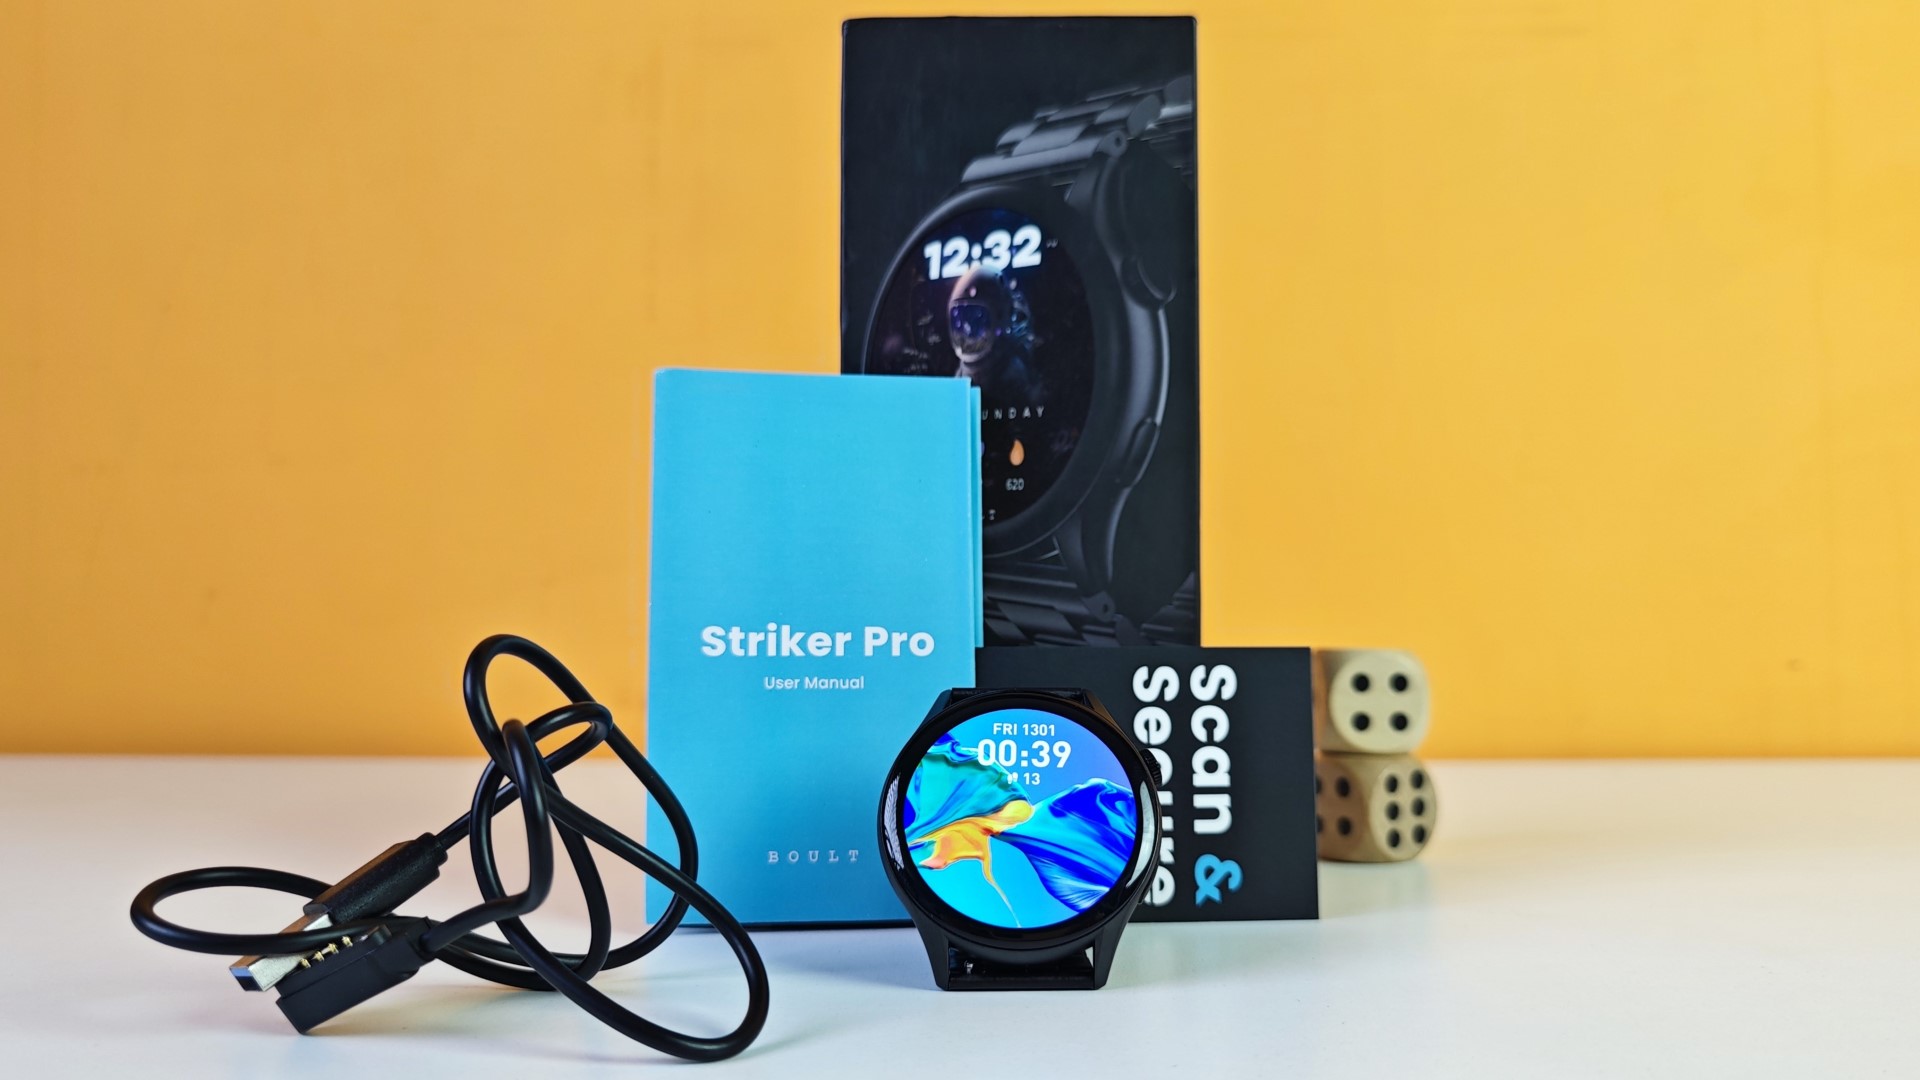 Boult Striker Pro Review: Is it Worth Buying?